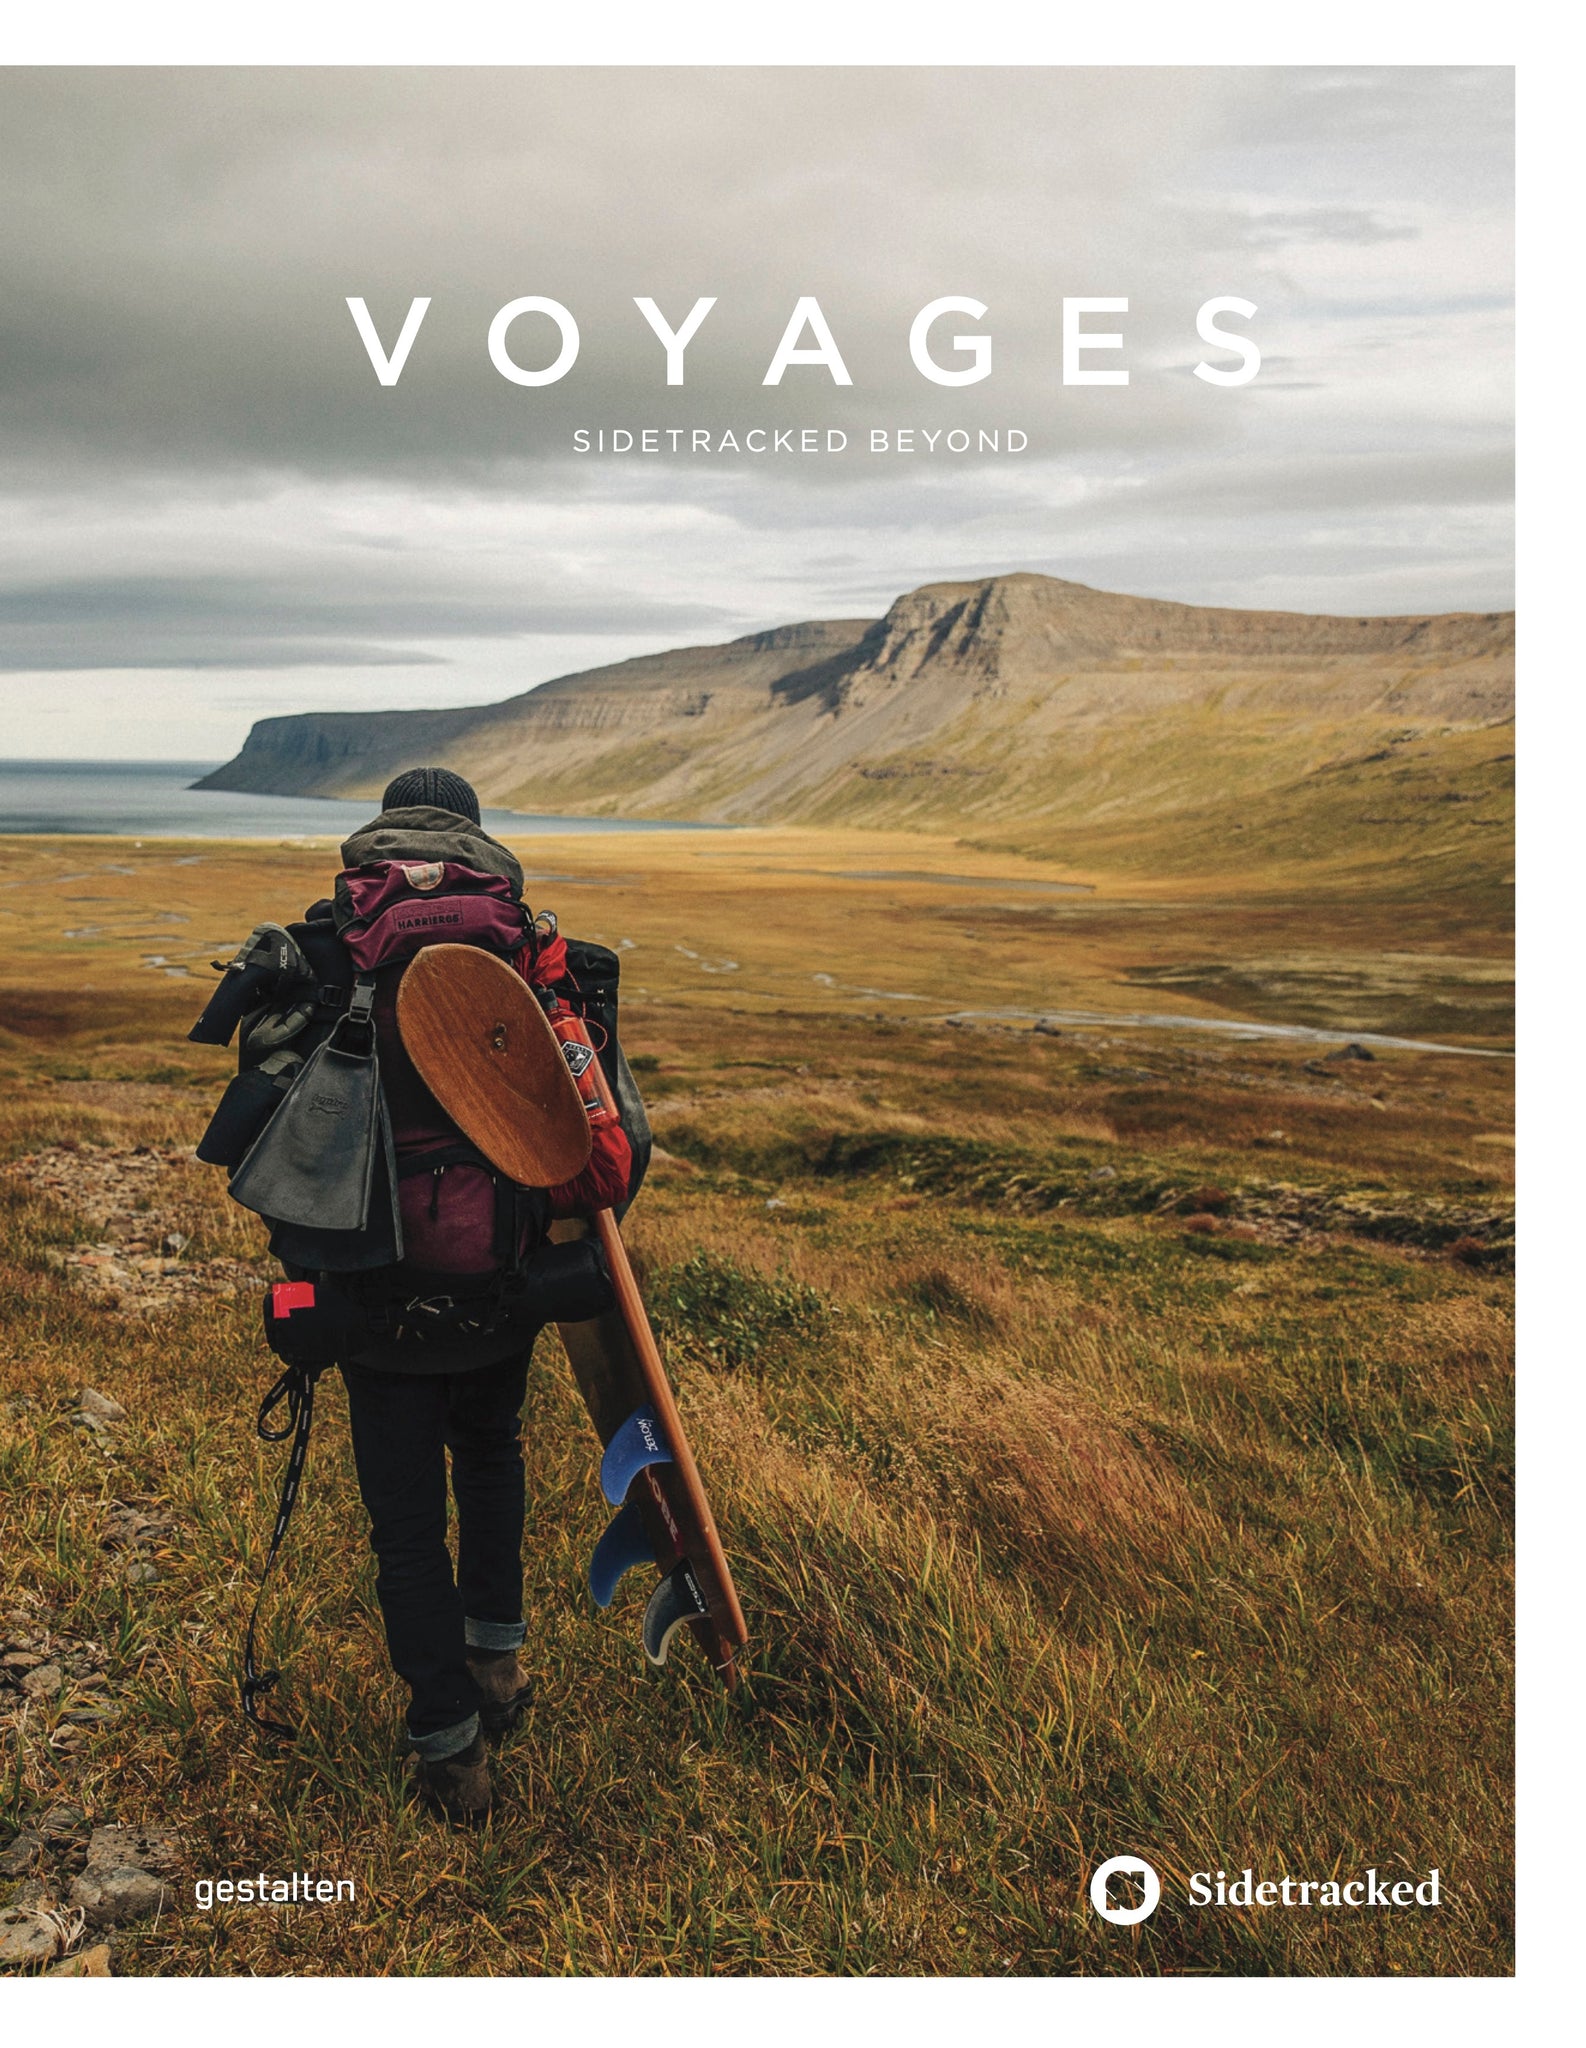 Voyages: Sidetracked Beyond cover